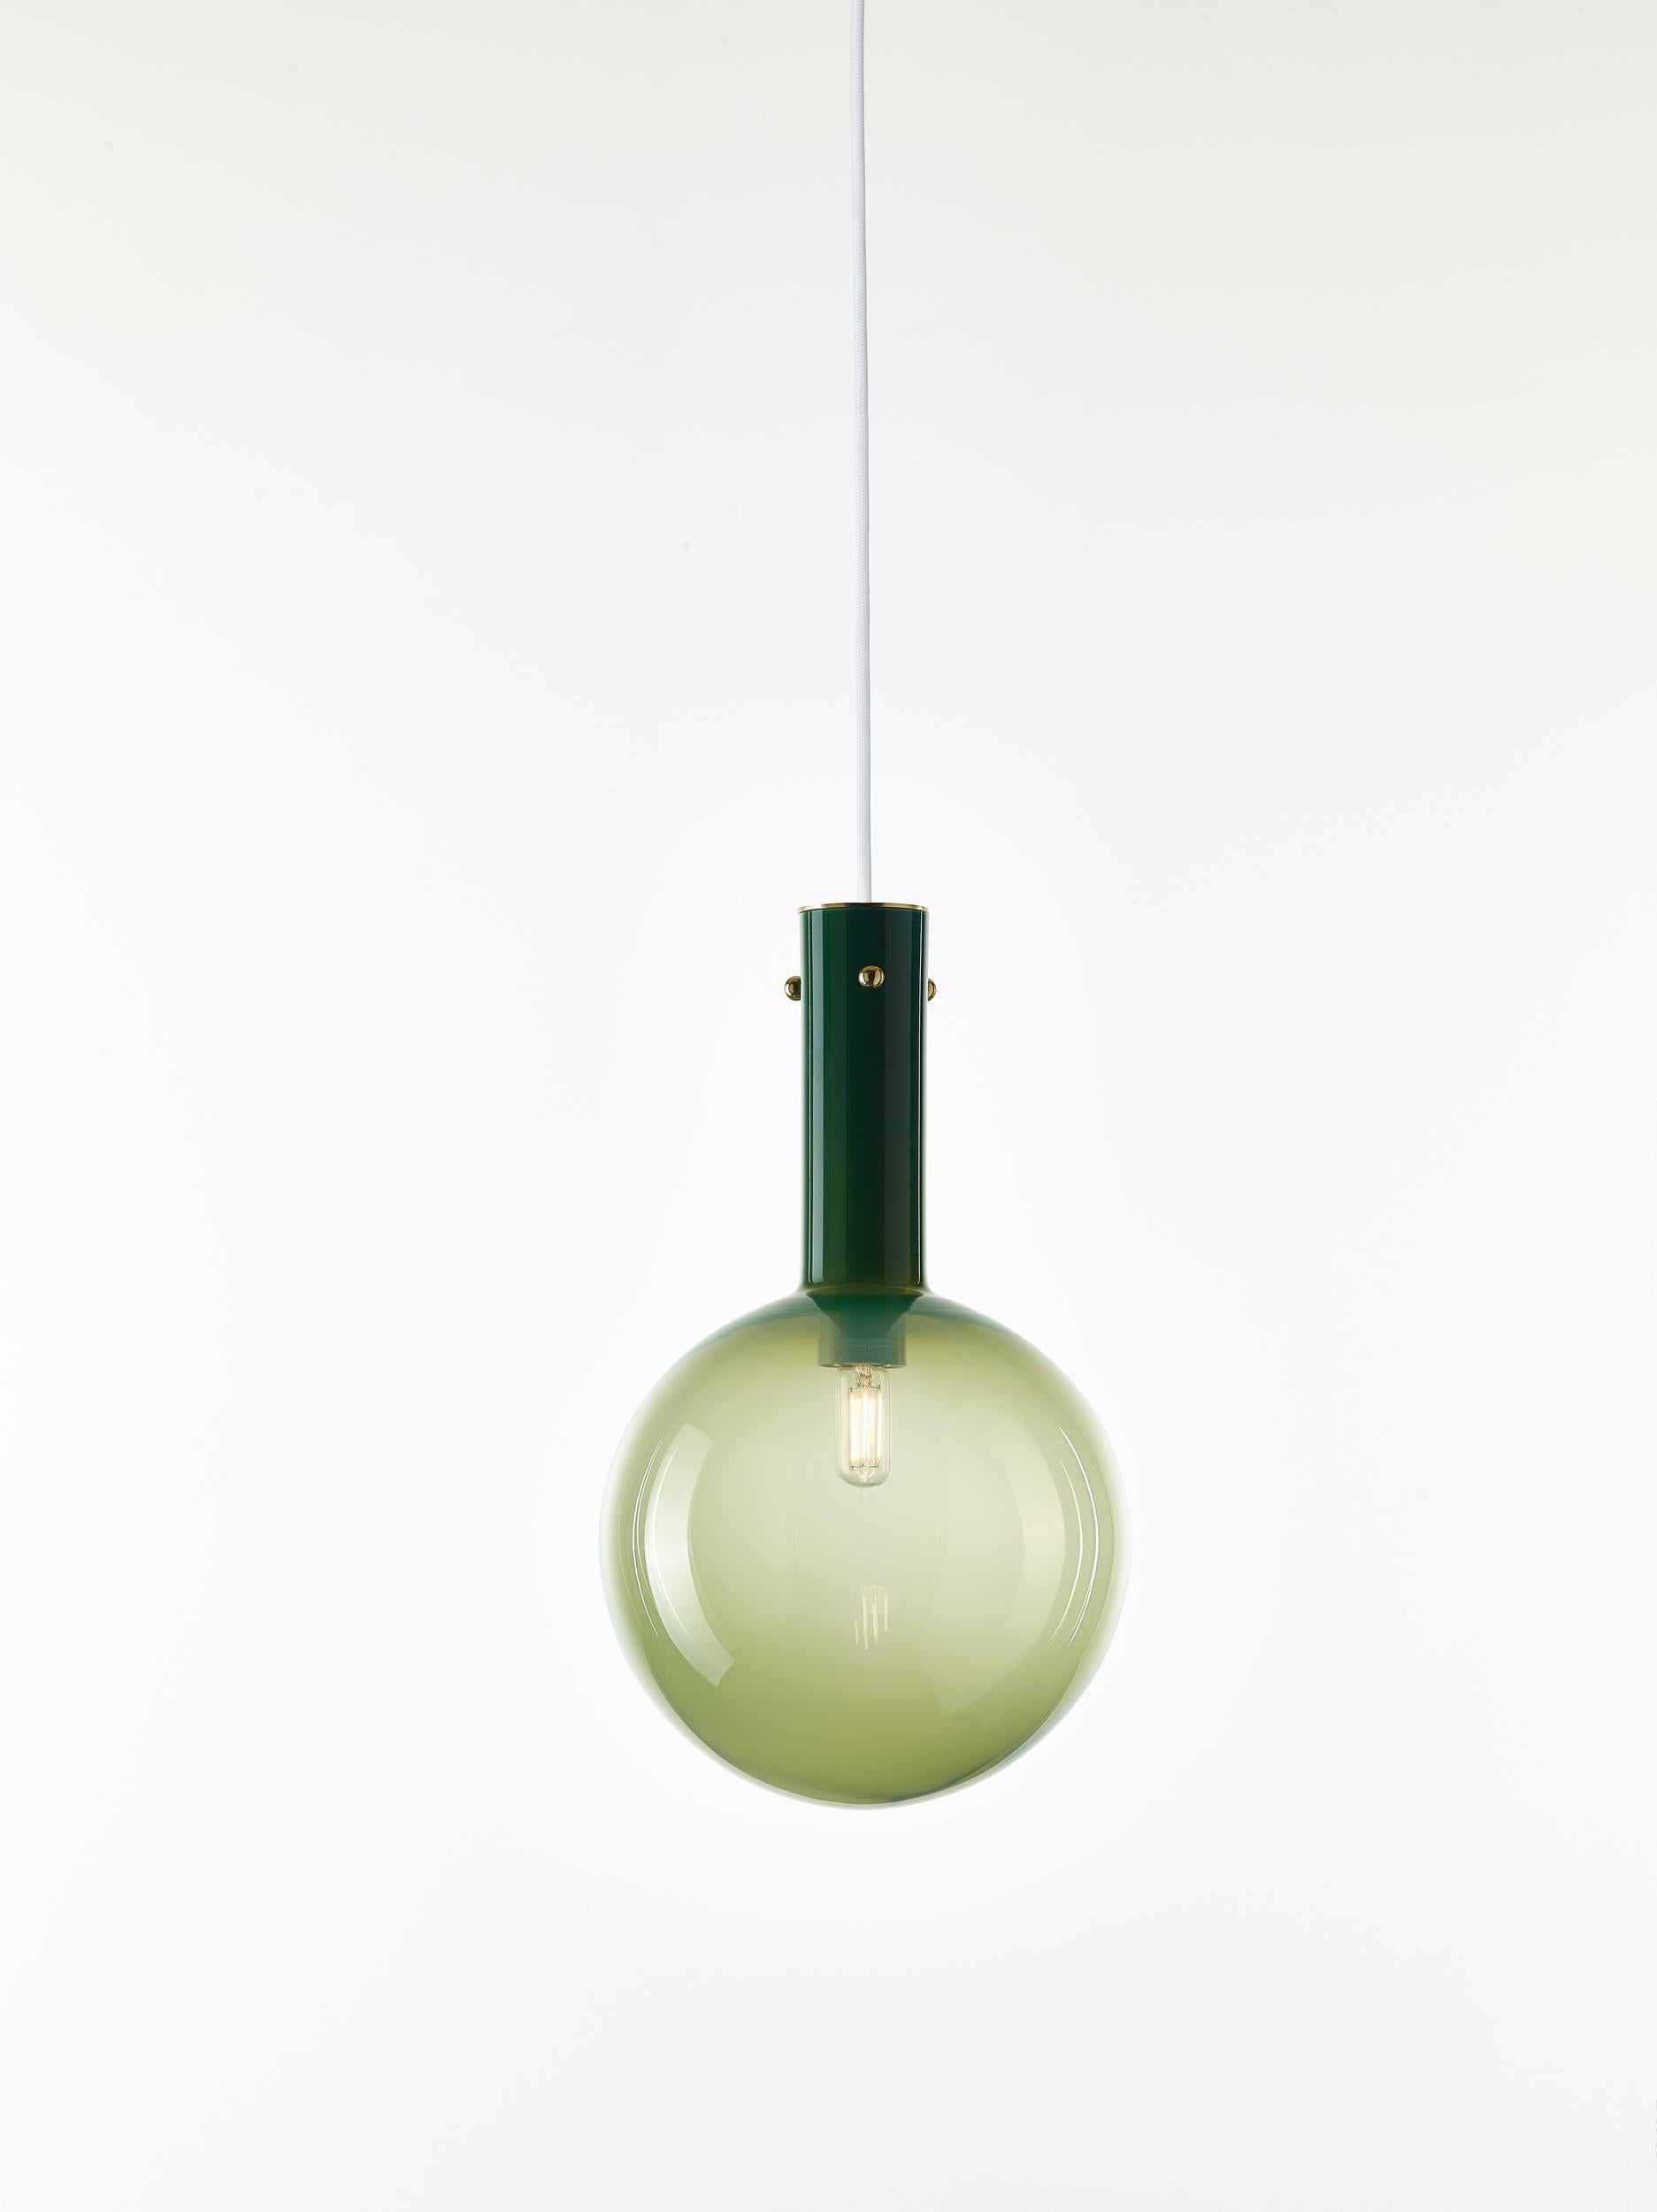 Set of 2 green Sphaerae pendant lights by Dechem Studio
Dimensions: D 20 x H 180 cm
Materials: Brass, metal, glass.
Also available: Different finishes and colours available

Only one homogenous piece of hand-blown glass creates the main body of